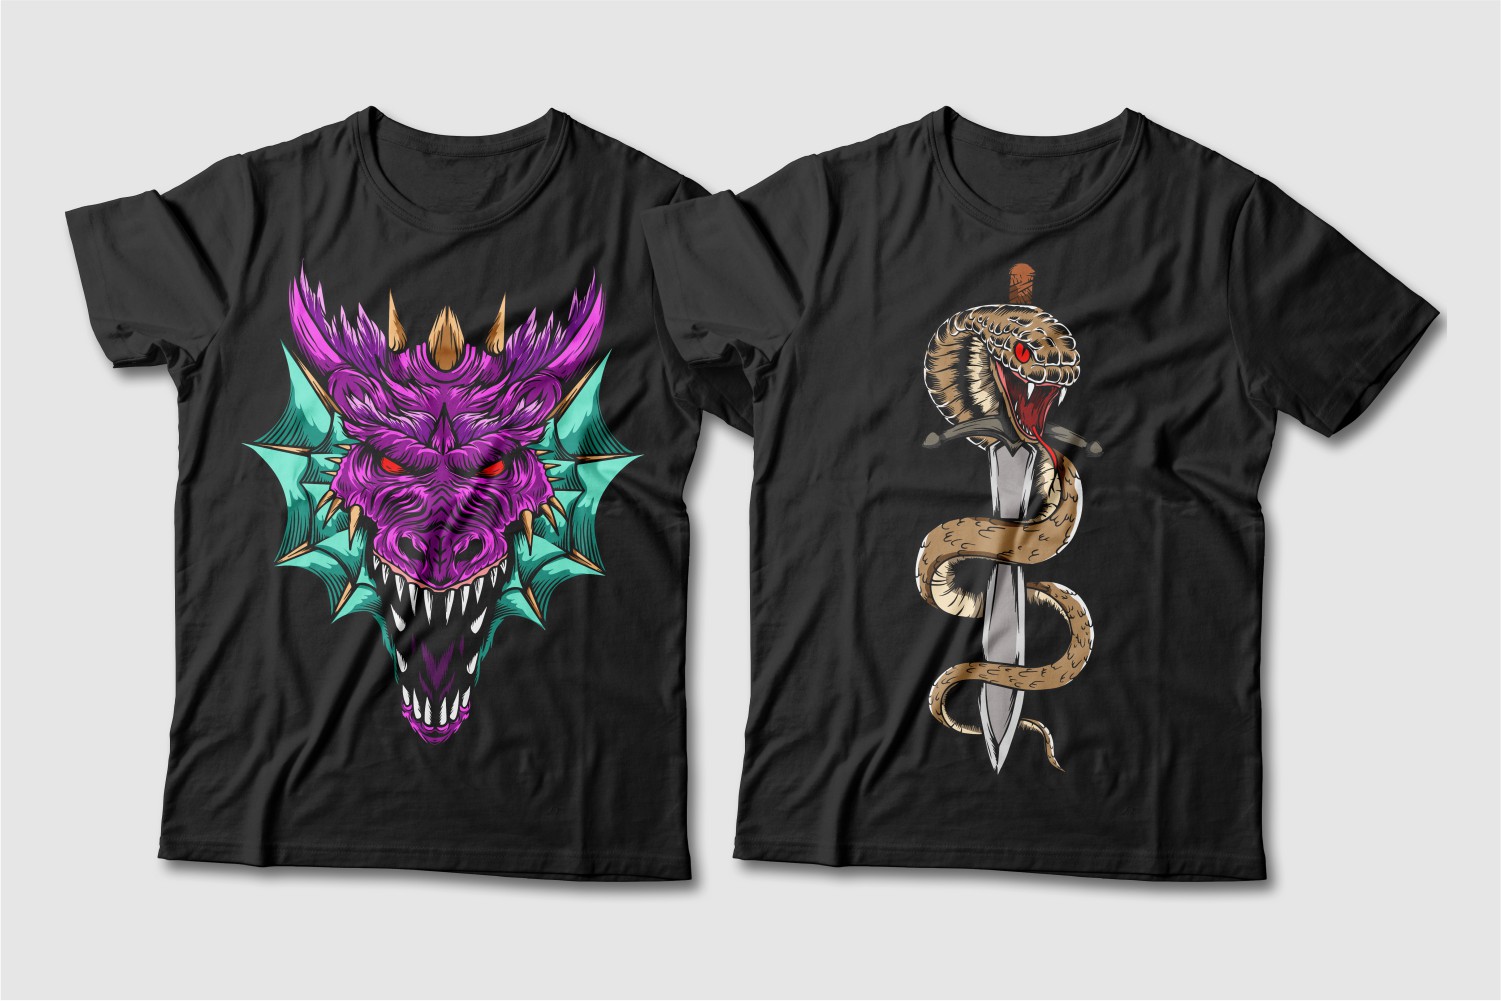 Black T-shirts with a crew neck and a purple dragon and a beige snake around the sword.